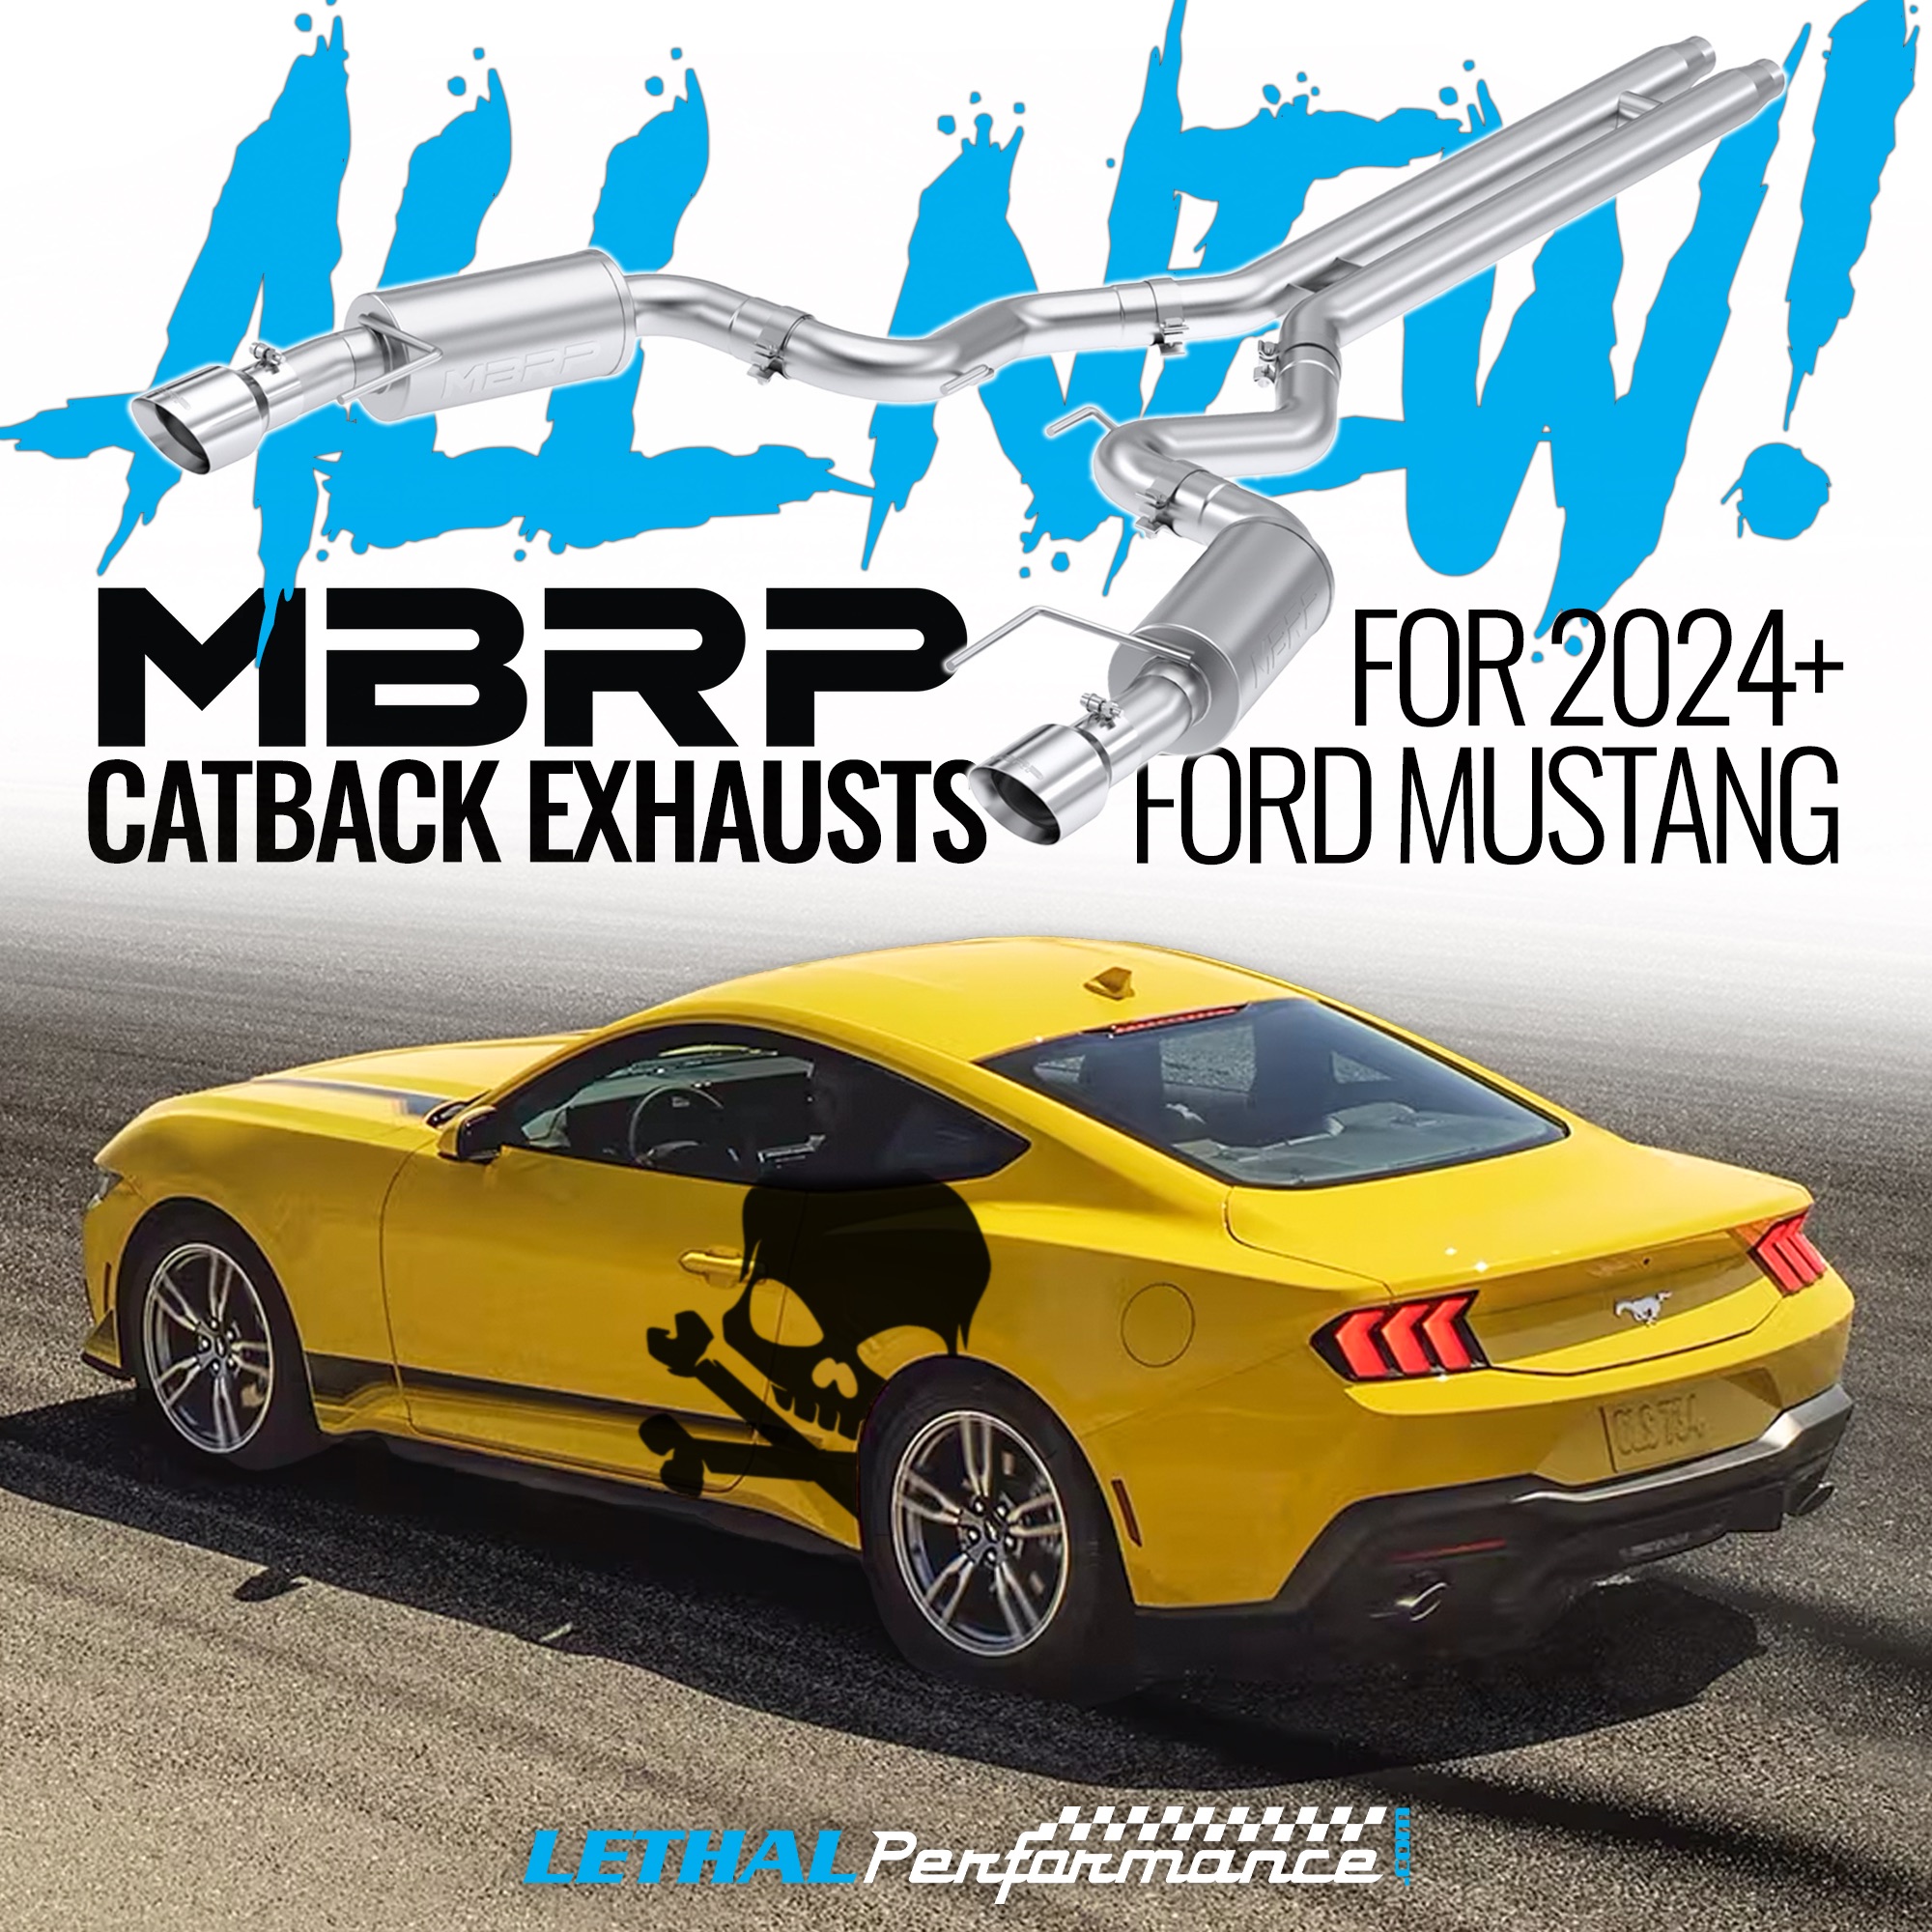 S650 Mustang MBRP Catback for 2024 Mustang NOW AVAILABLE at Lethal Performance!! mbrp 2024 2